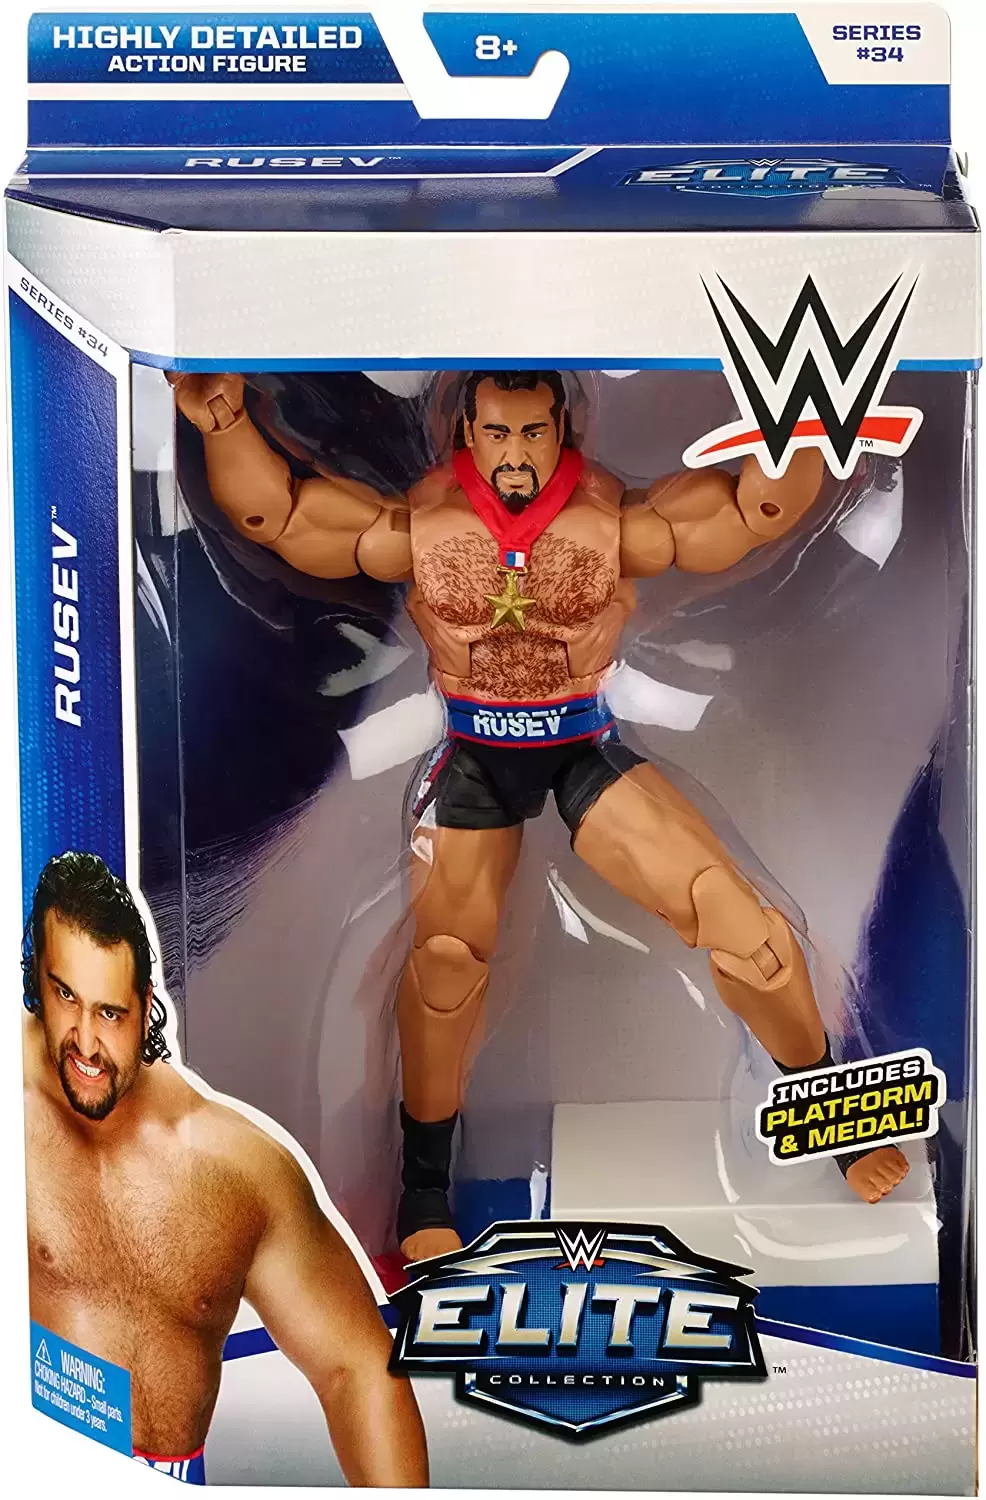 WWE Elite Collection - Rusev